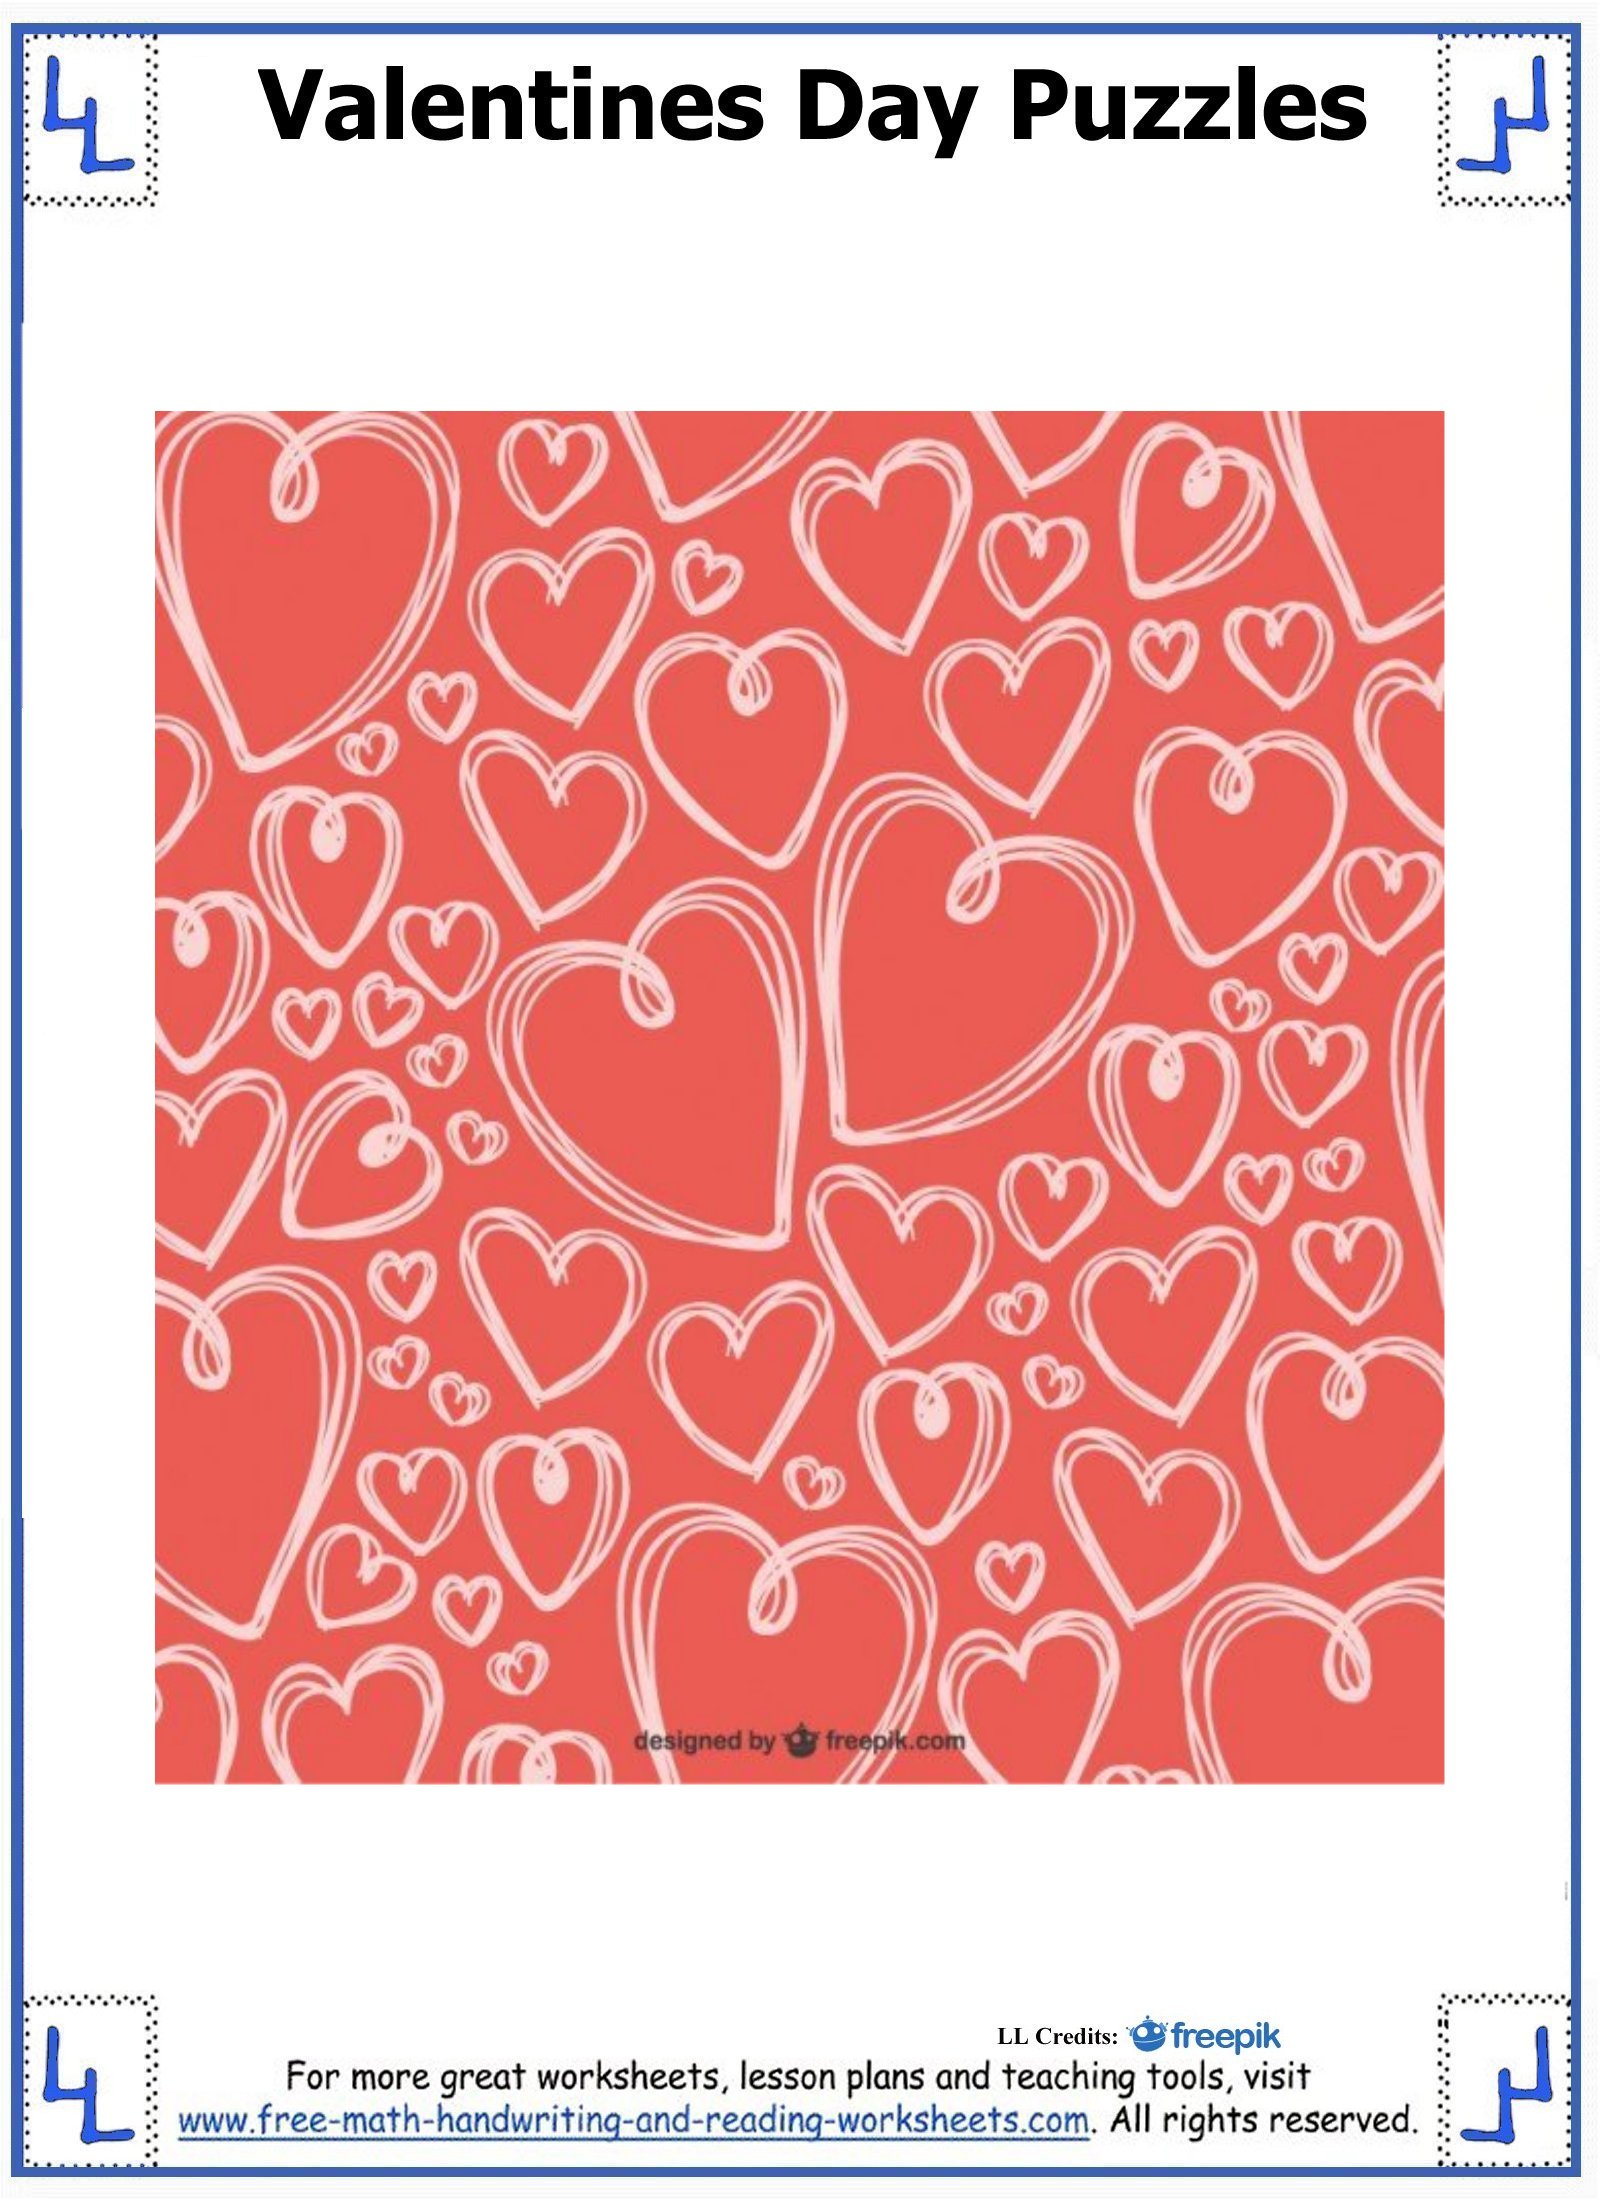 valentine puzzles worksheets puzzle printable math paste cut activities below handwriting reading